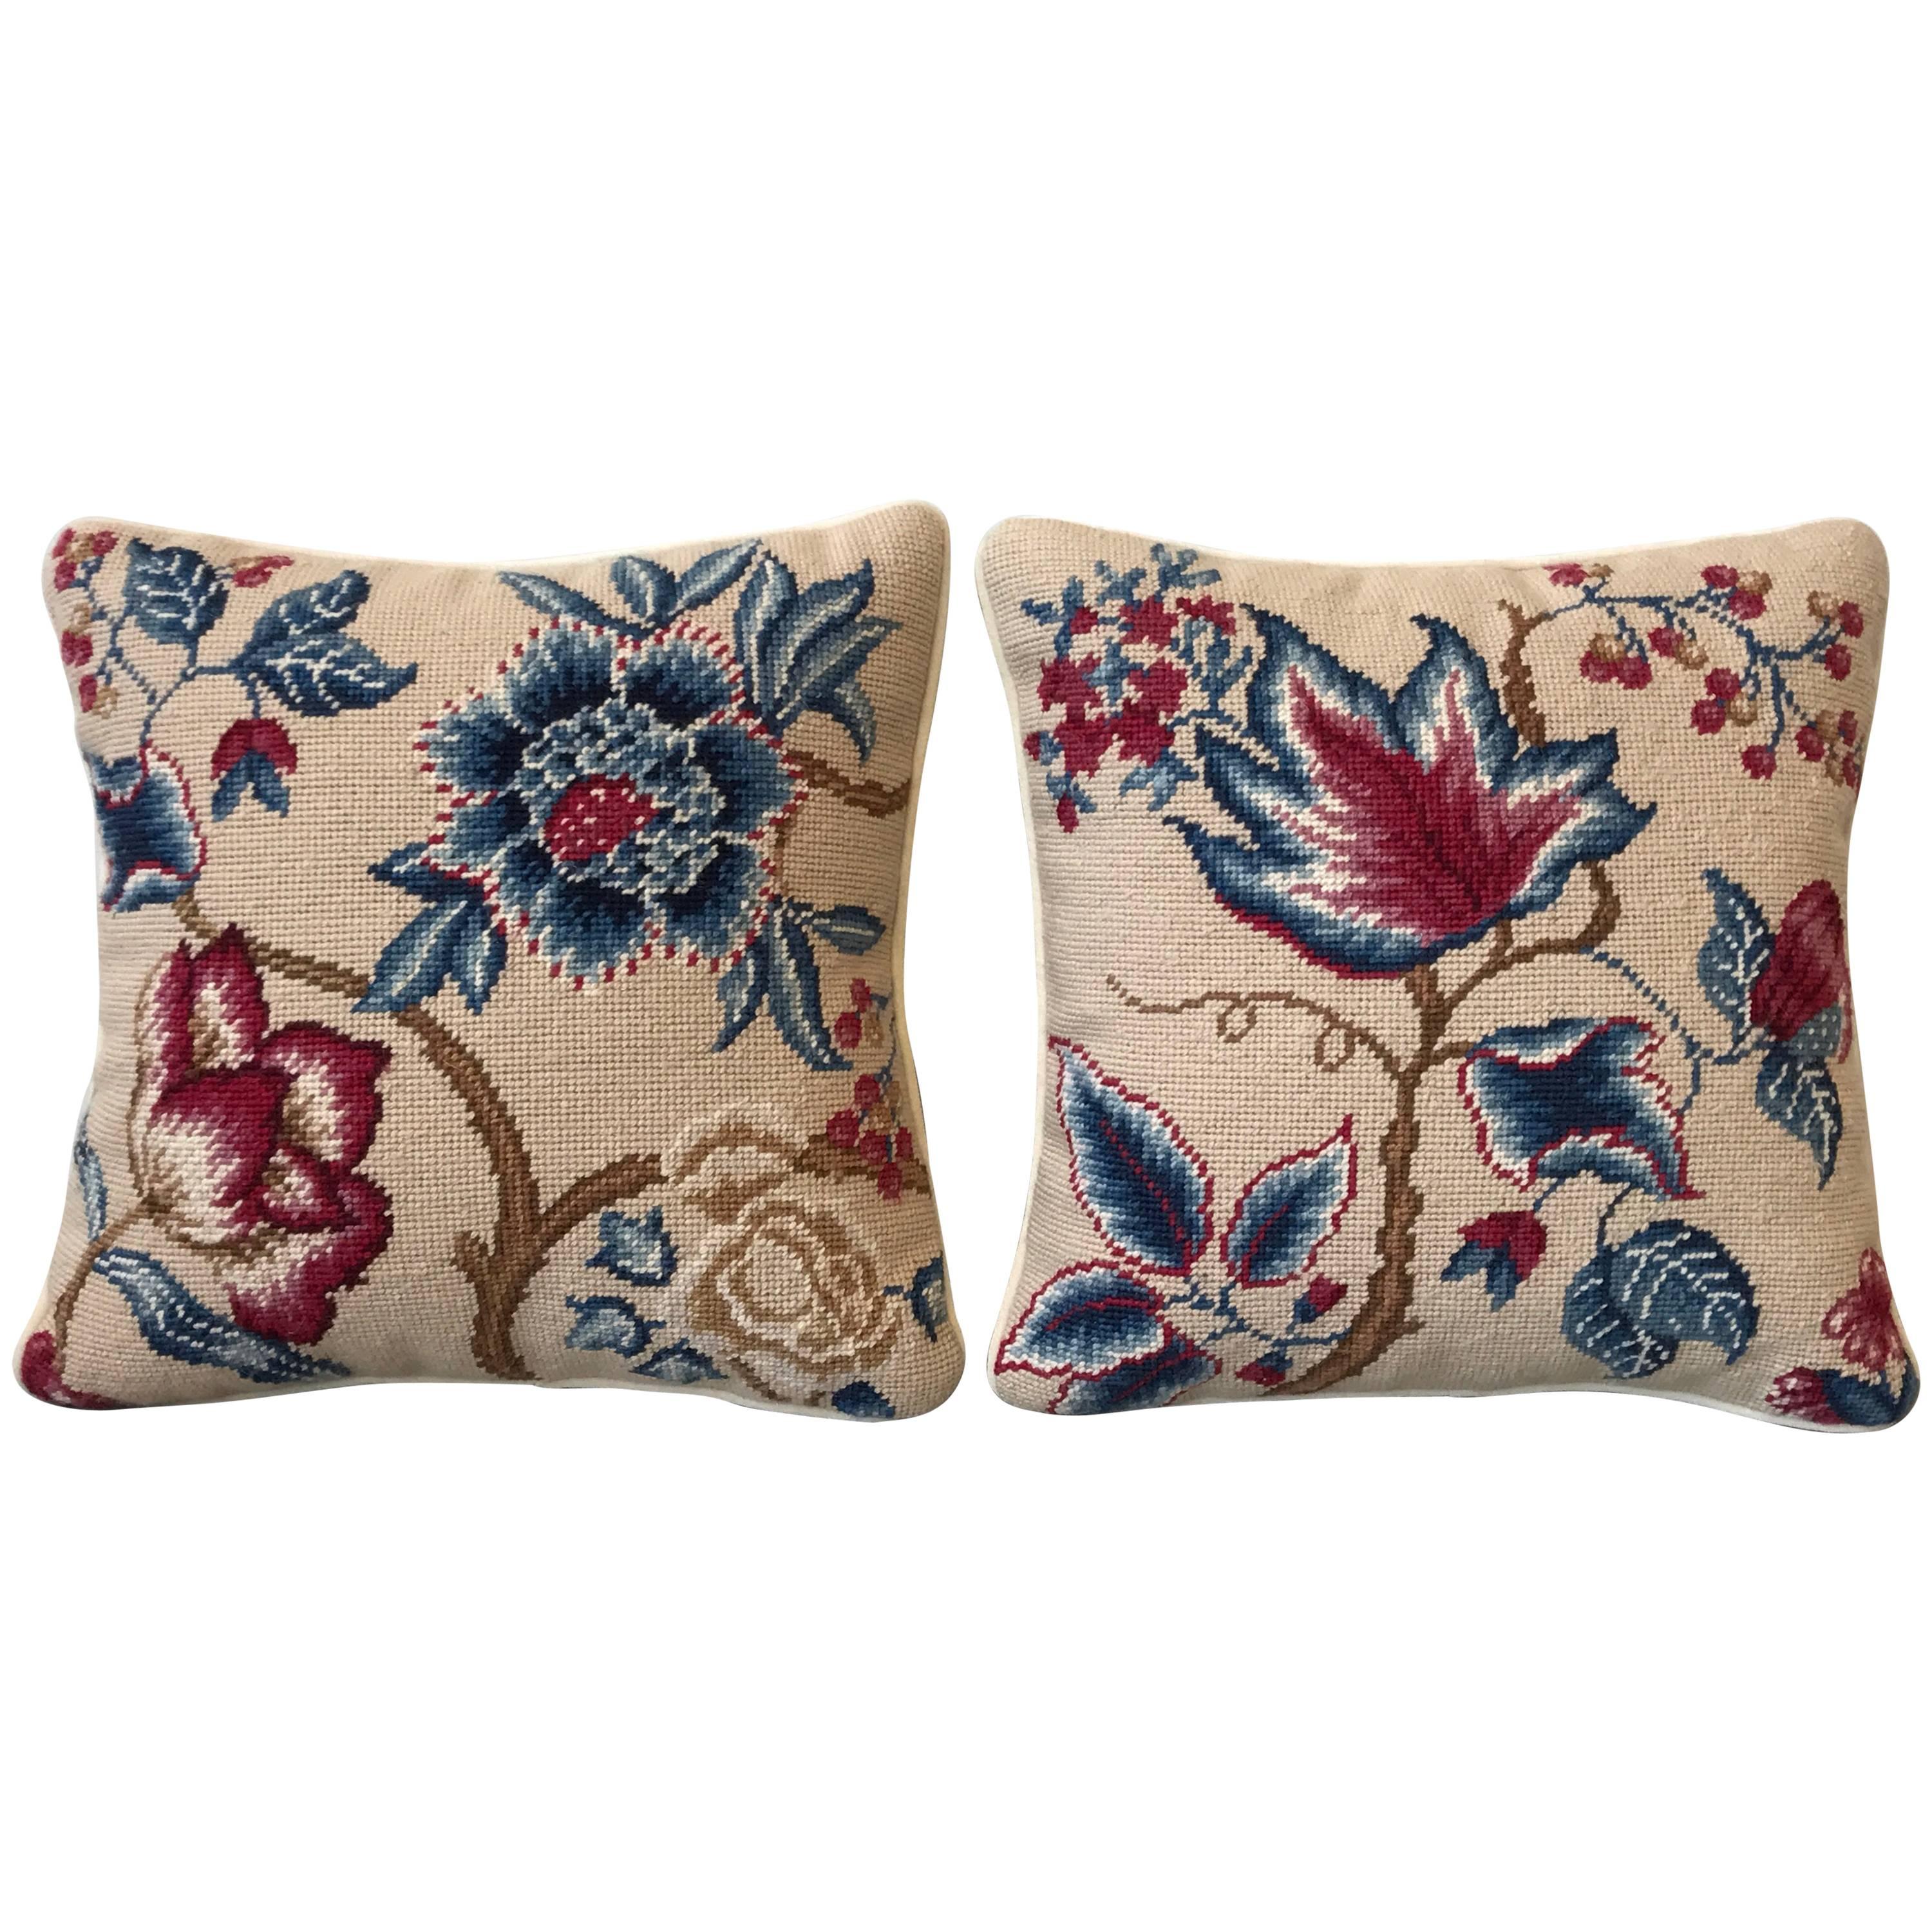 1960s Tree of Life Motif Floral Needlepoint Pillow, Pair